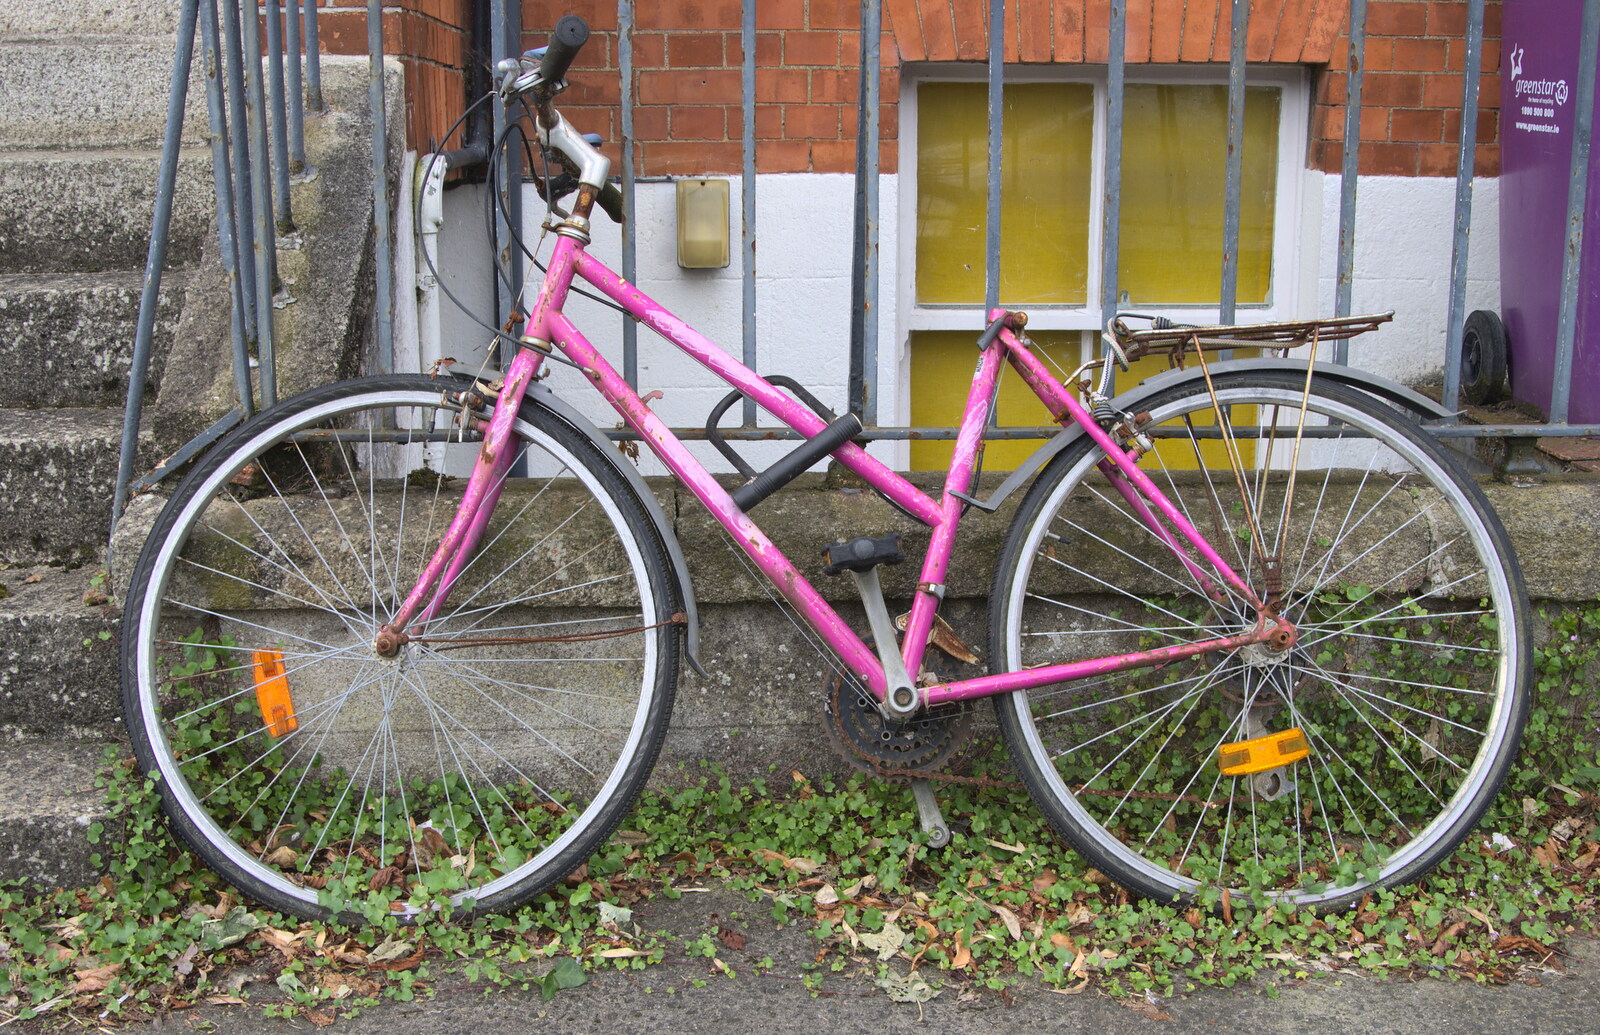 This bike is missing an important component from Sion Hill and Blackrock for the Day, Dublin, Ireland - 17th September 2016